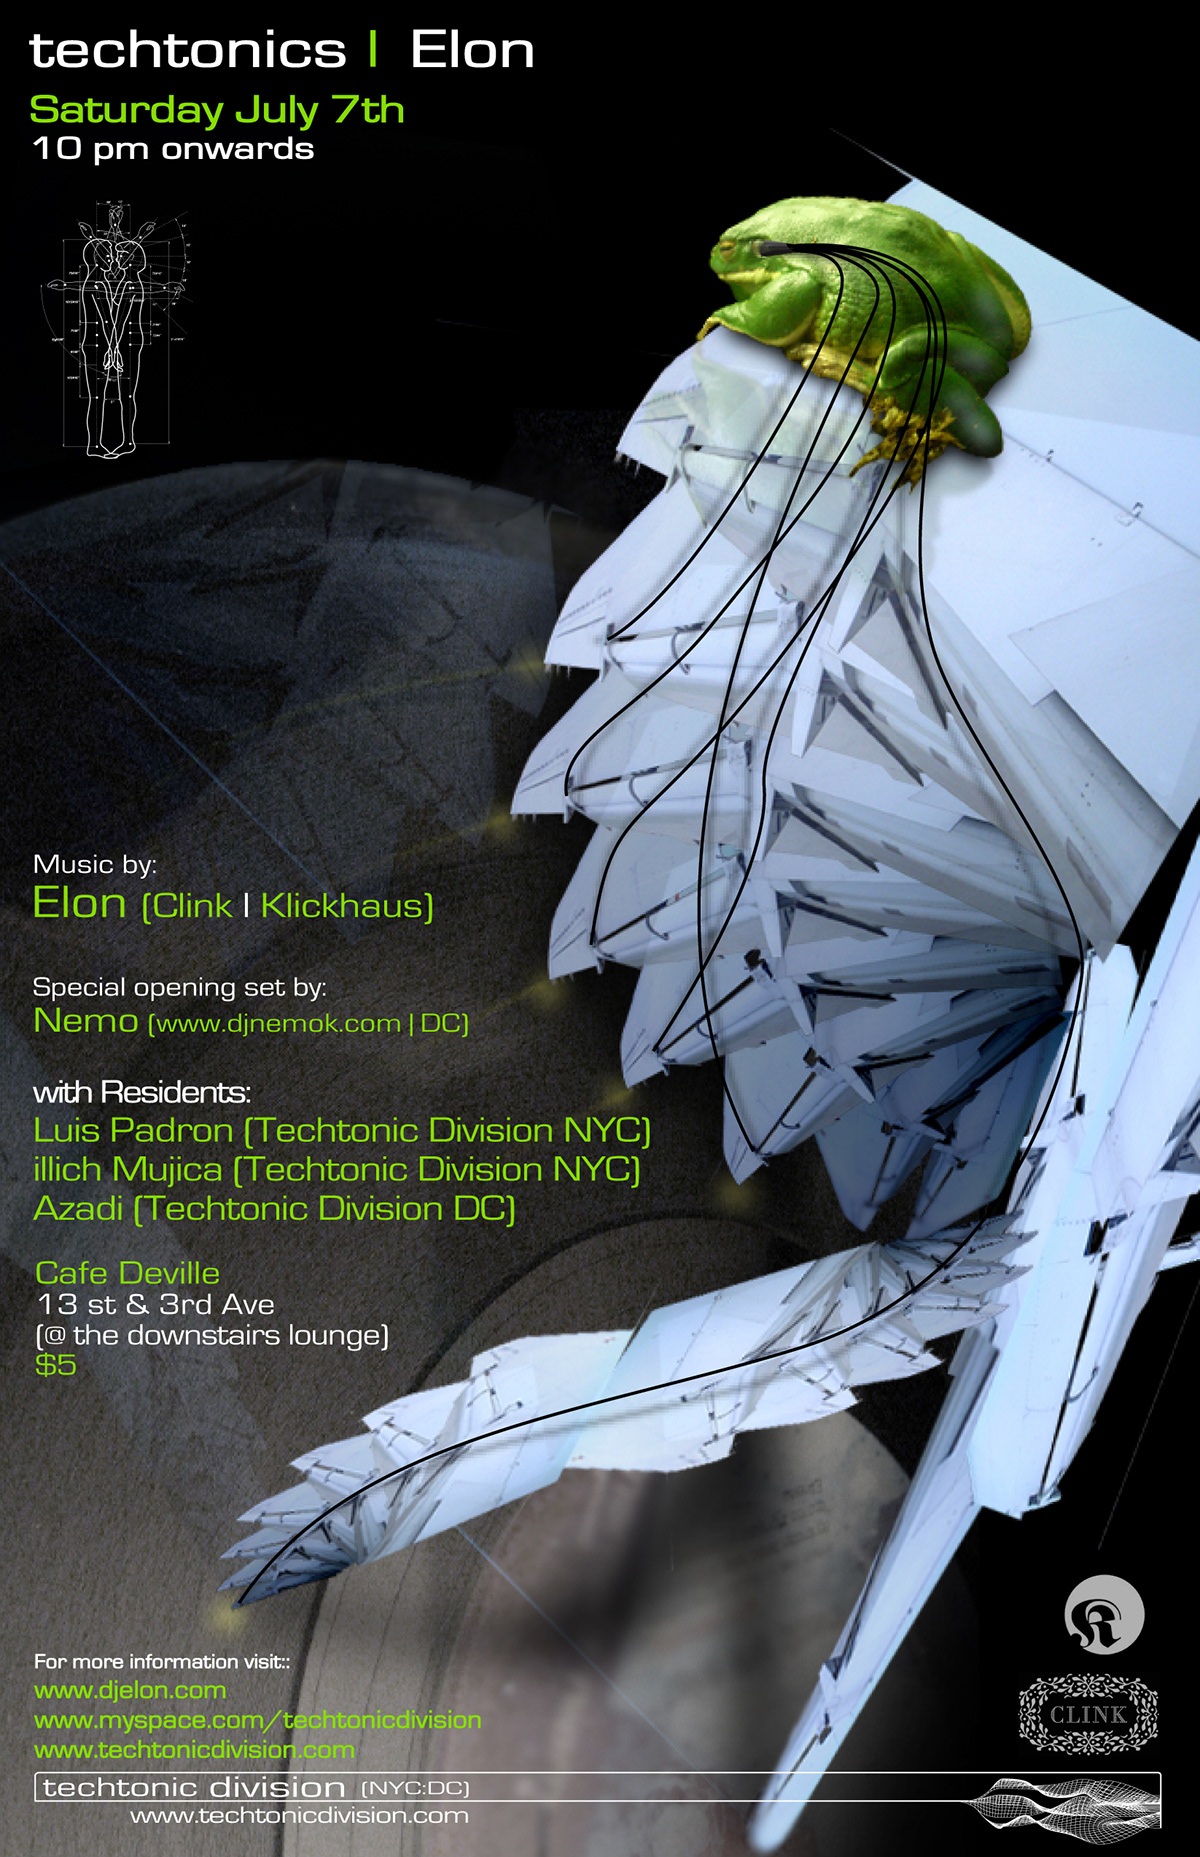 event invites  flyers  graphic design  nyc  electronic dance music